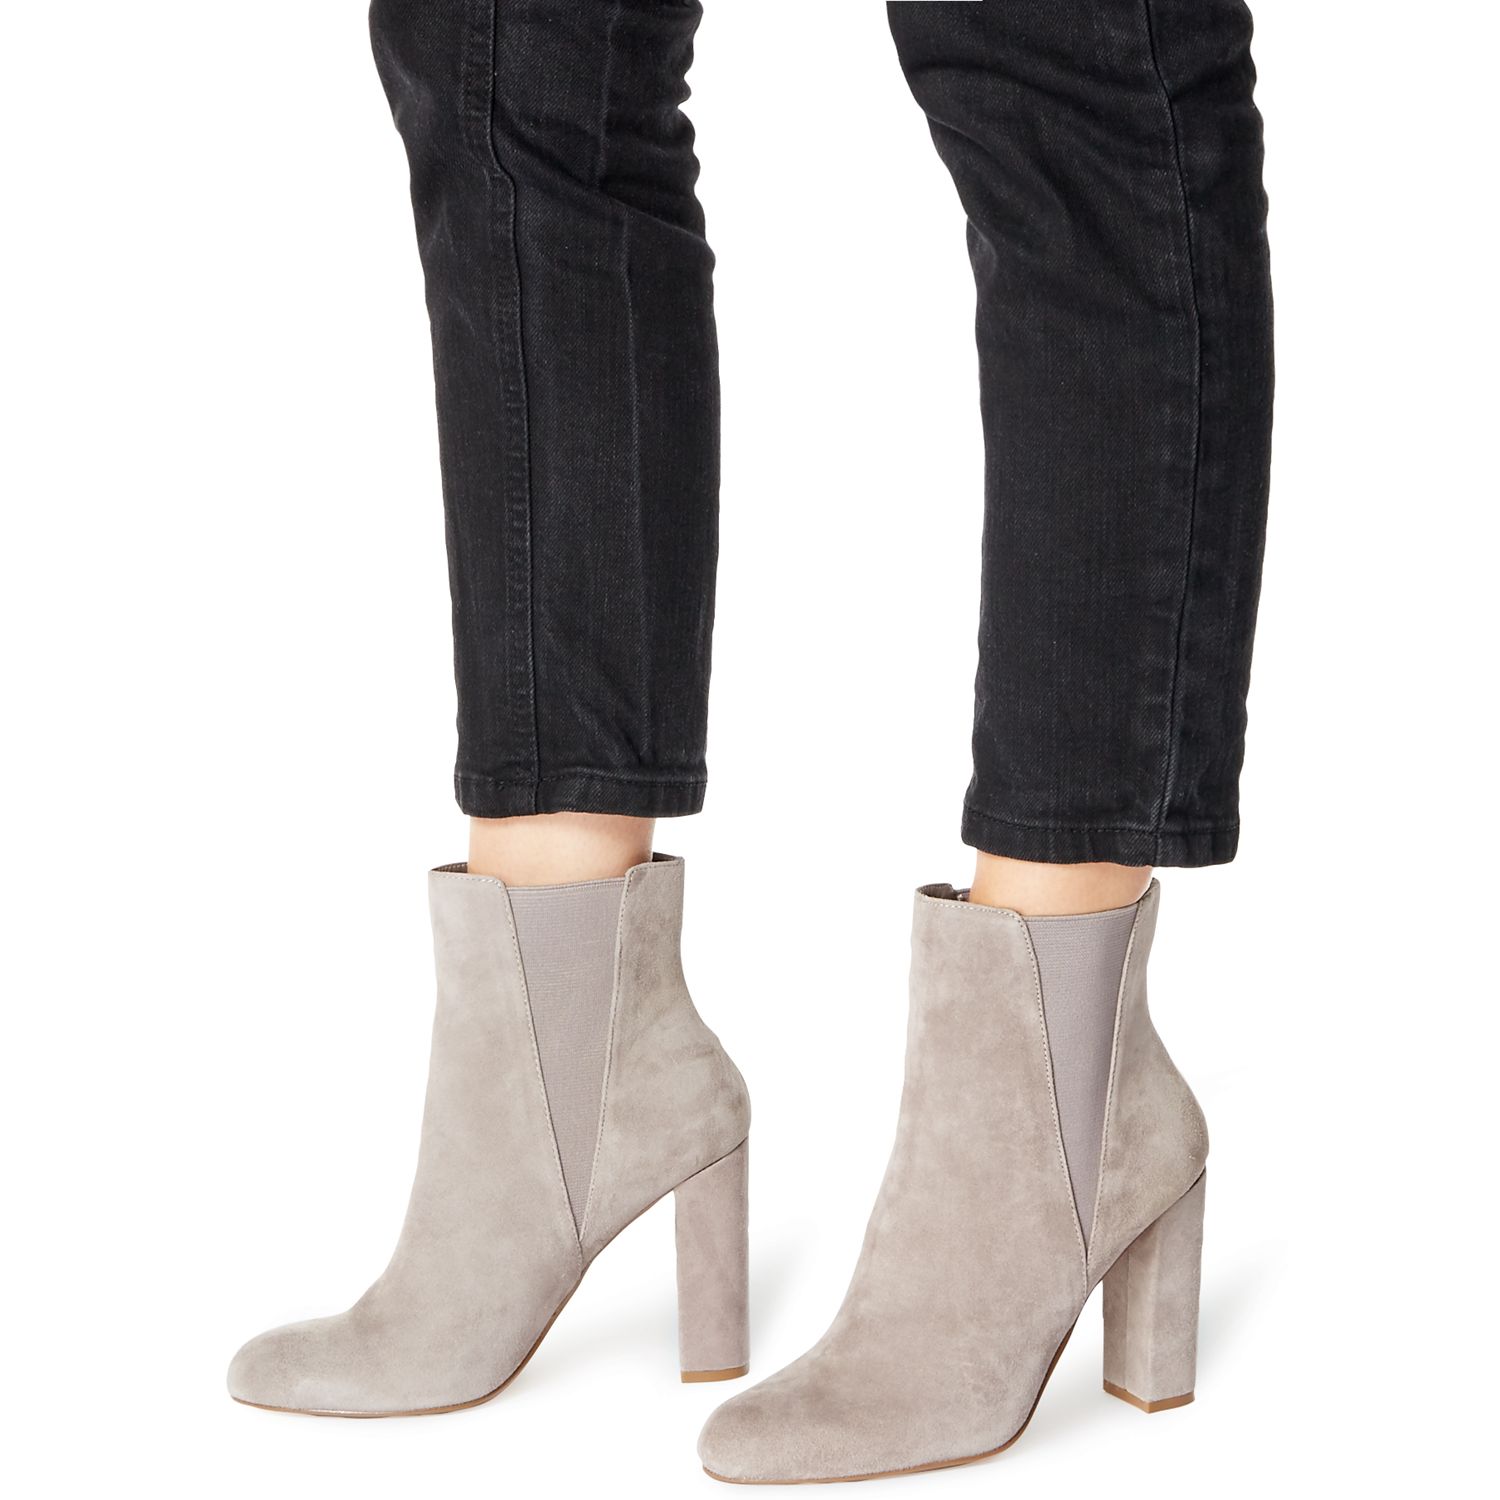 steve madden grey ankle boots